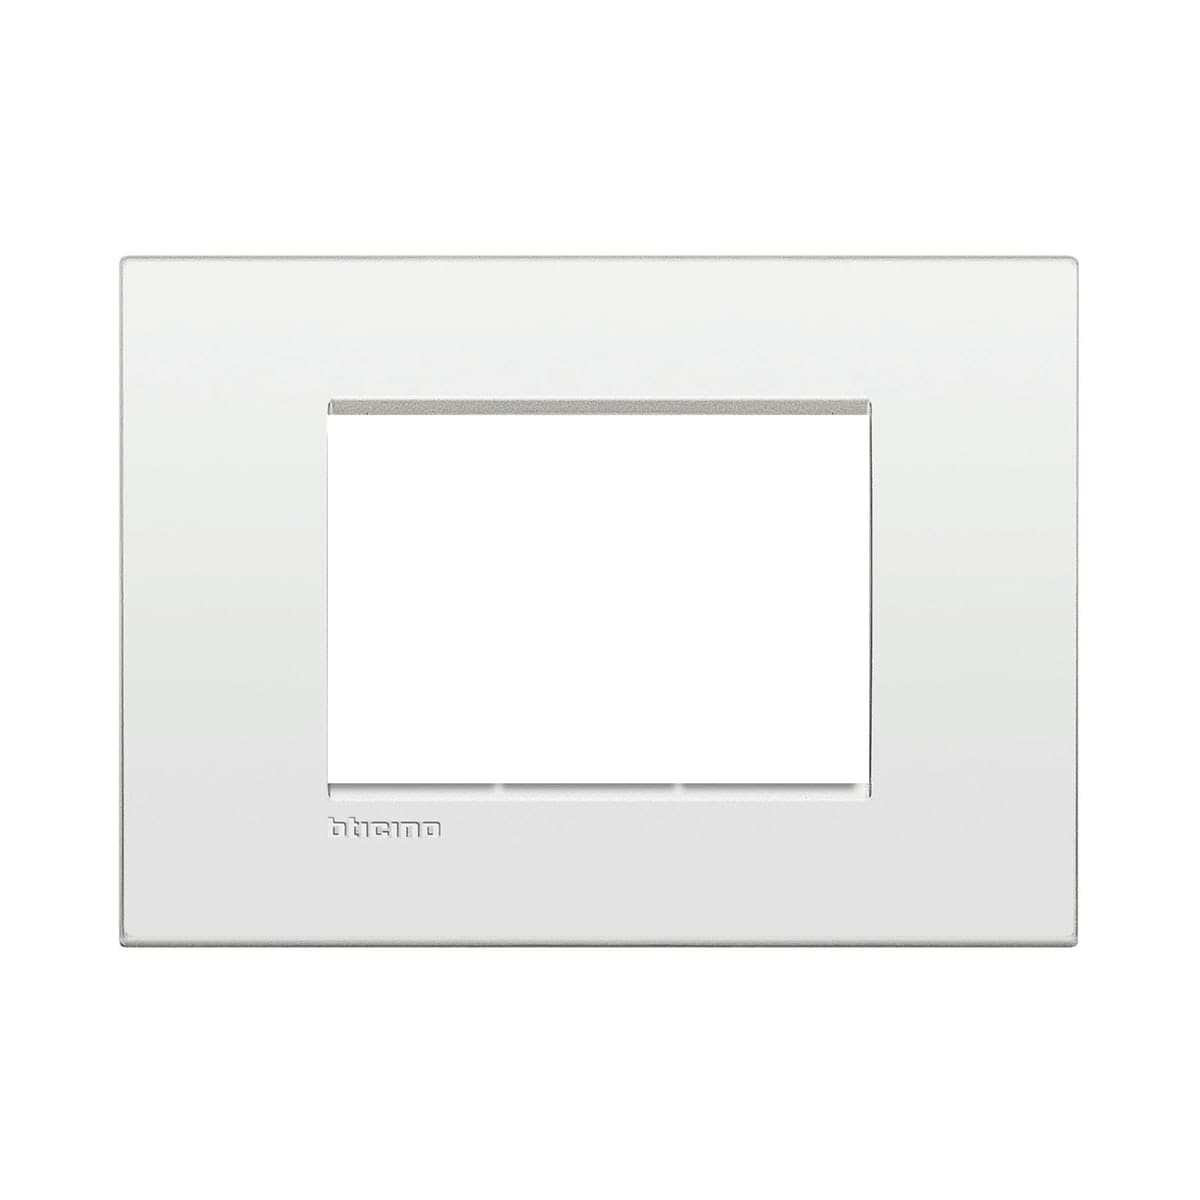 PLATE LIVING LIGHT AIR 3 PLACES WHITE